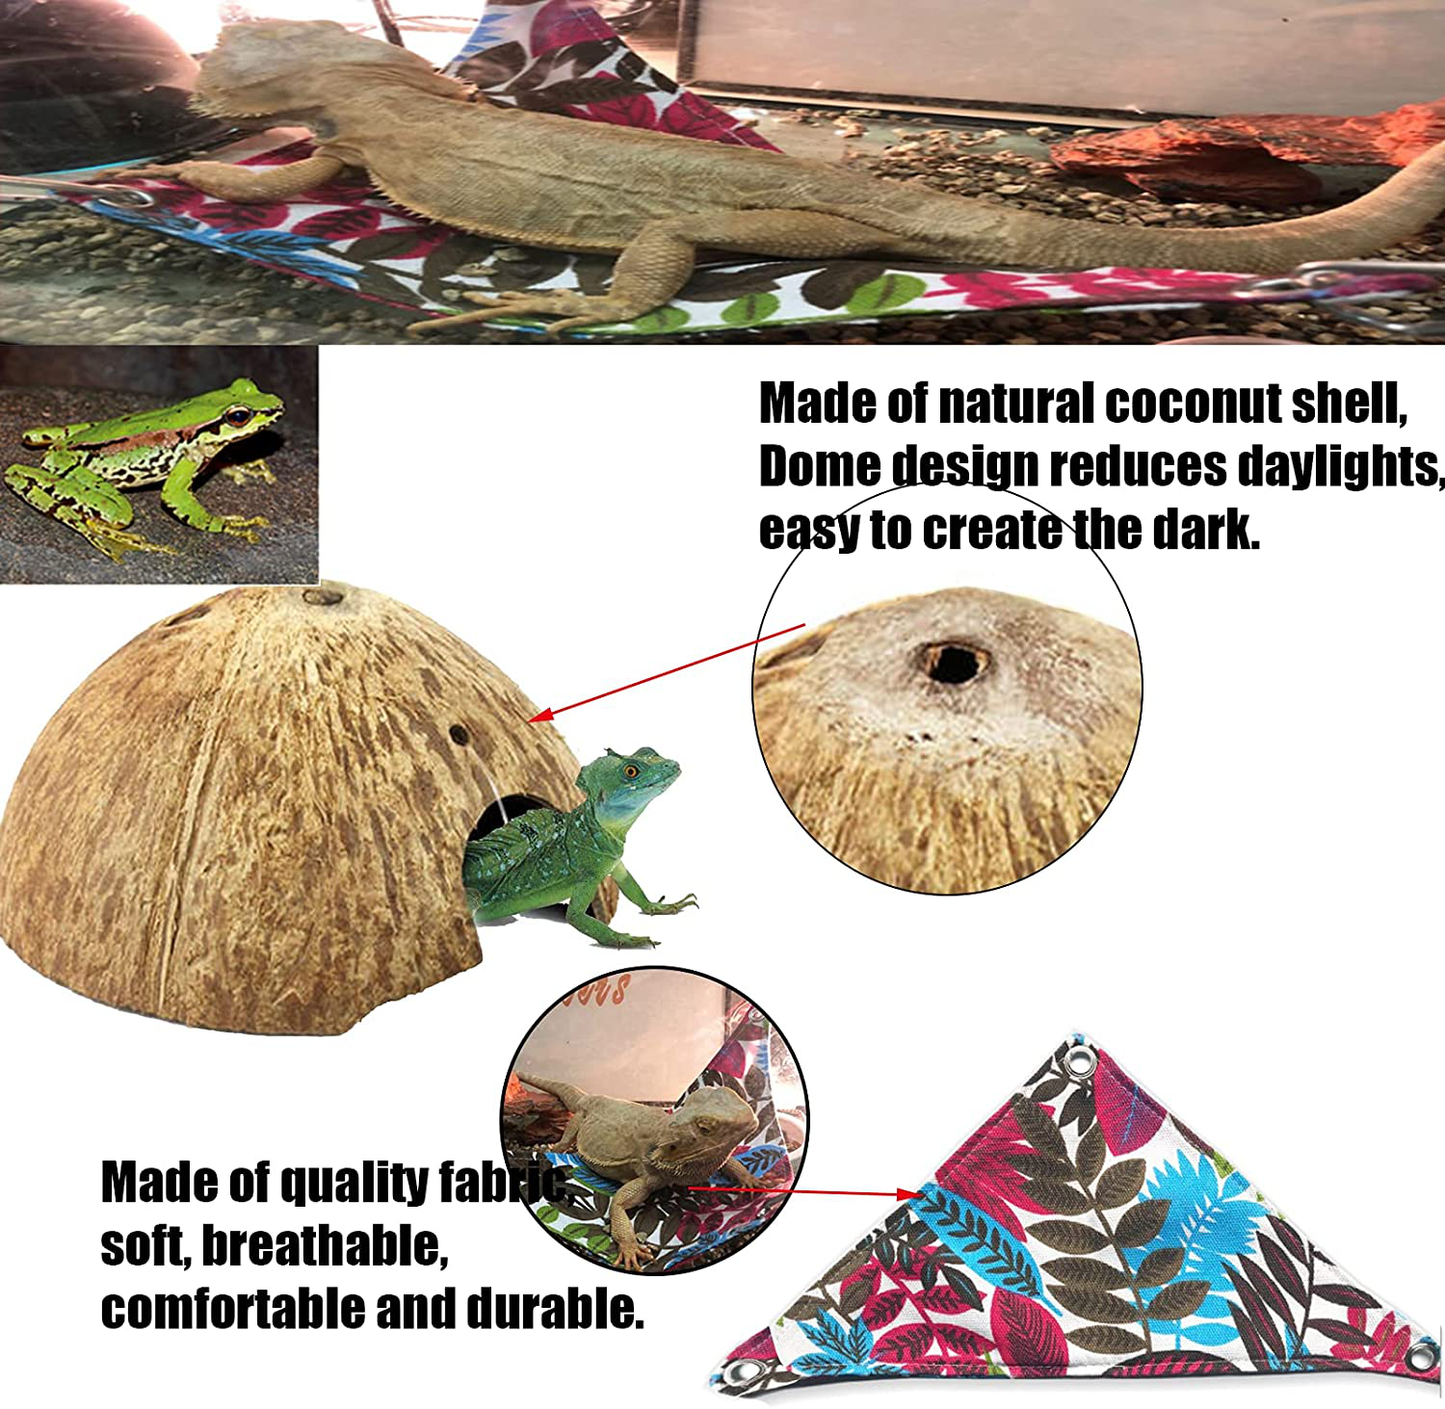 Lizard Bearded Dragon Hammock Set Tank Accessories, Coconut Shell Hut Hideout Cave Natural Seagrass Jungle Climber, Flexible Bend-A Branch Jungle Climbing Vines for Geckos and More Reptiles Perched